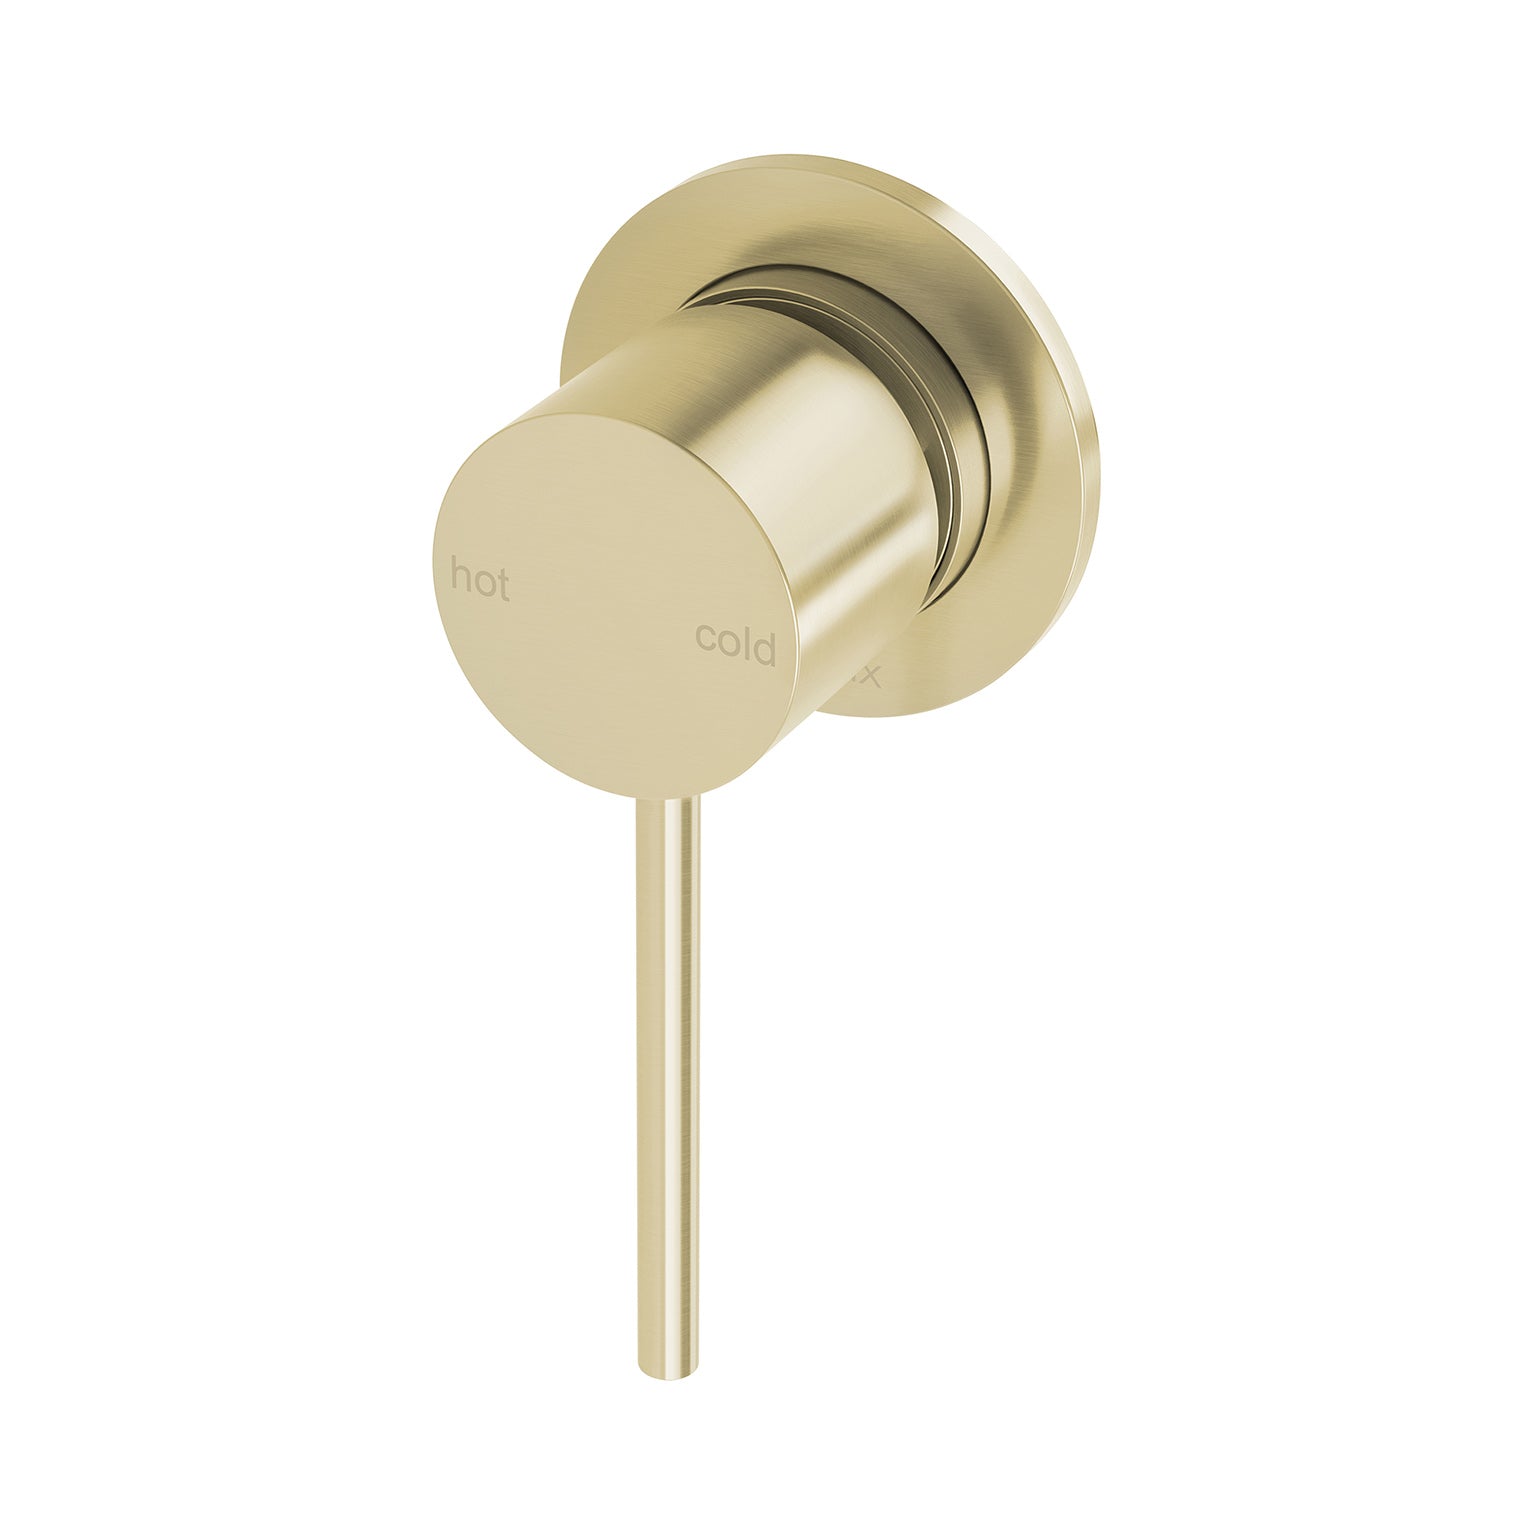 PHOENIX VIVID SLIMLINE SWITCHMIX SHOWER / WALL MIXER BACKPLATE FIT-OFF AND ROUGH-IN KIT 60MM BRUSHED GOLD